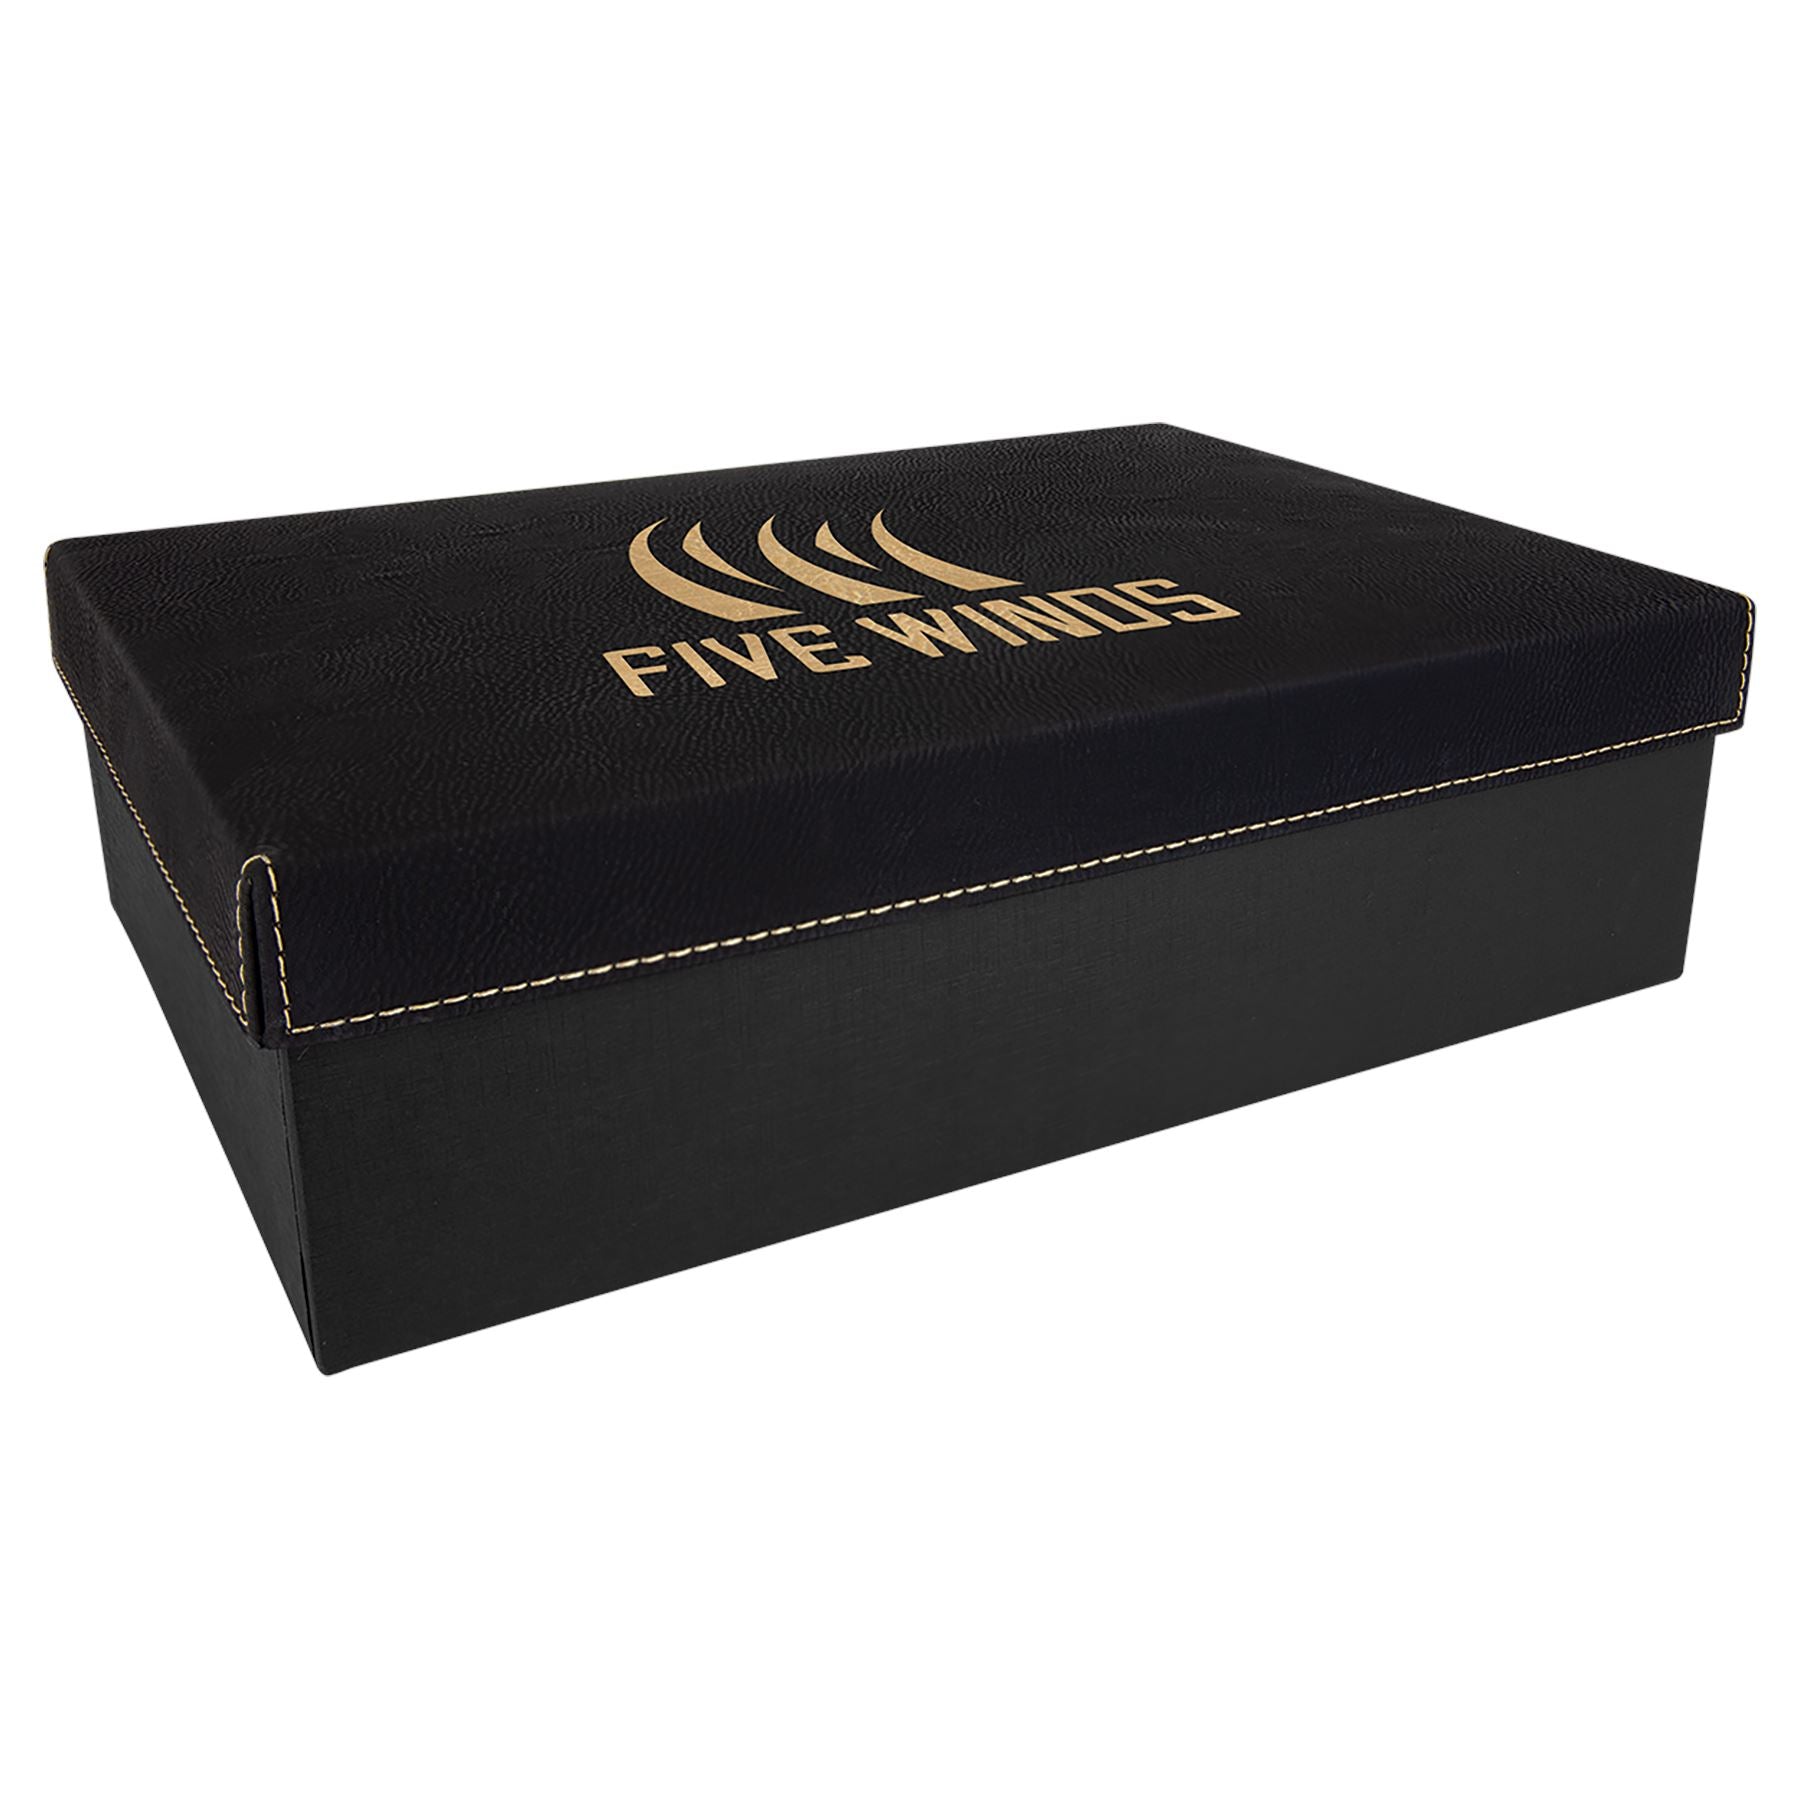 Gift Box with Laserable Leatherette Lid, 11 3/4" x 7 3/4", Laser Engraved Gift Box Craftworks NW Black/Gold Small 